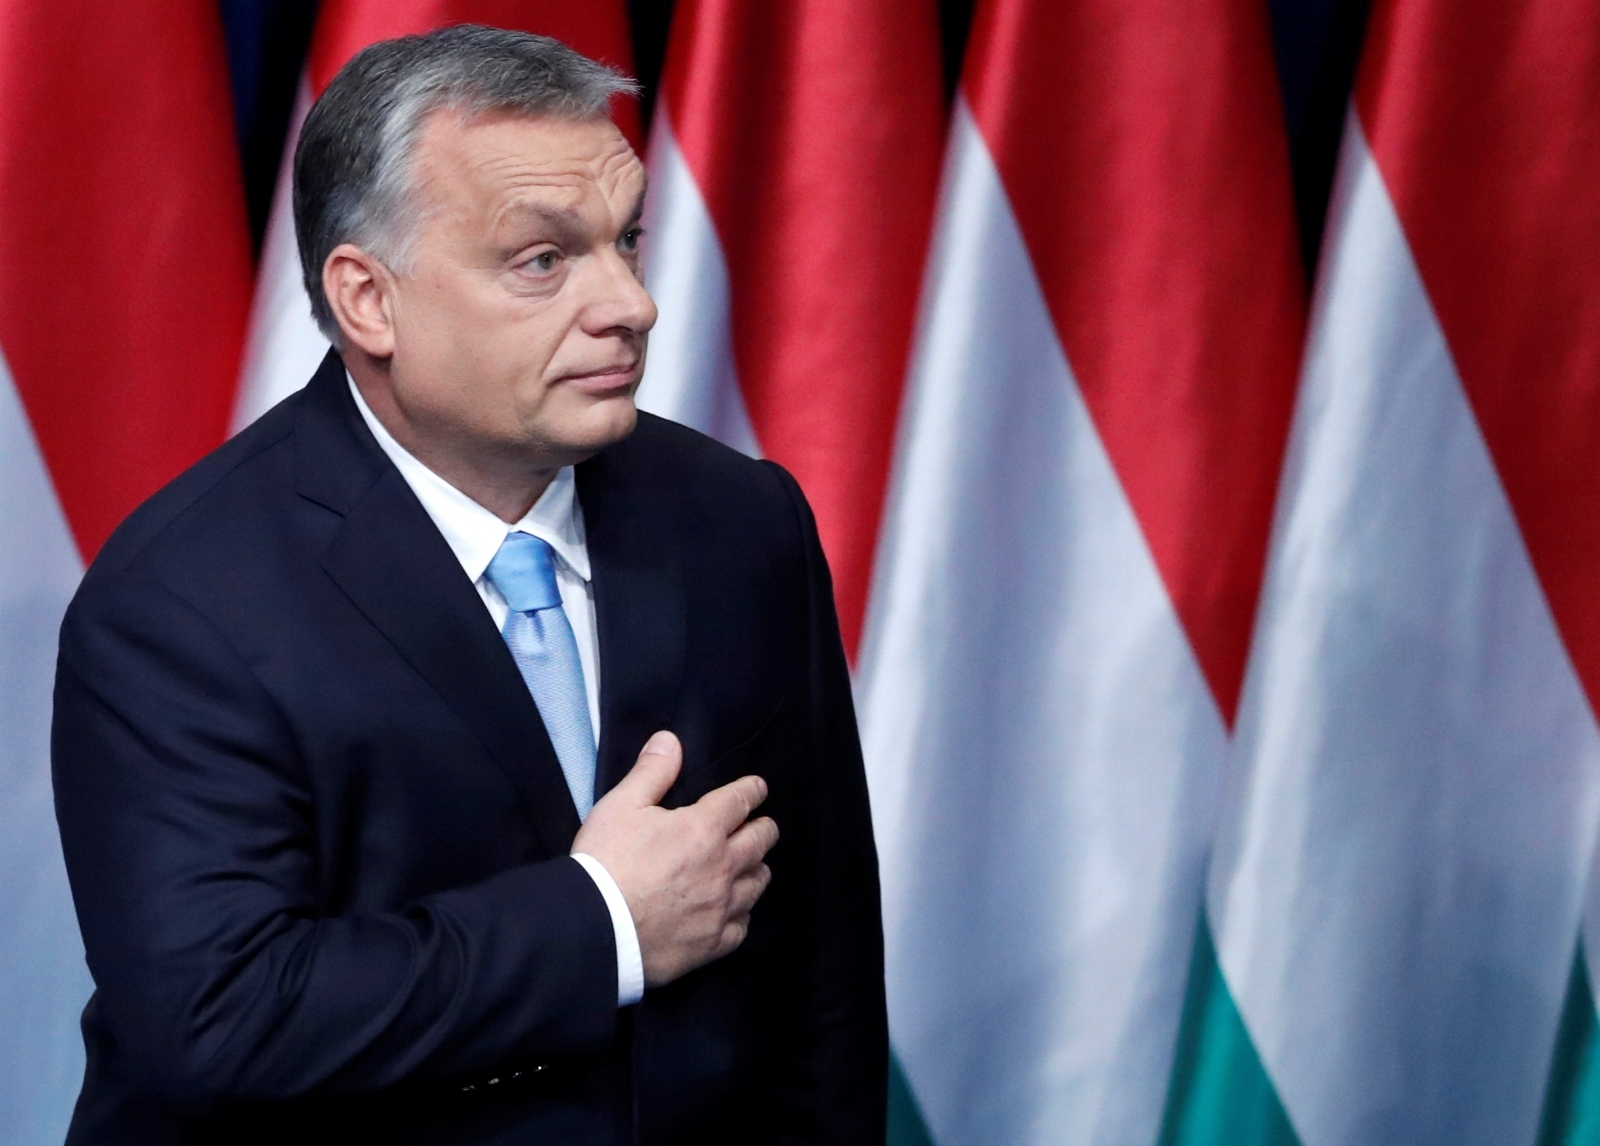 Hungary PM Orban delivers annual state of the nation address Hungarian Prime Minister Viktor Orban leaves the stage after delivering his annual state of the nation speech in Budapest, Hungary, February 10, 2019. REUTERS/Bernadett Szabo BERNADETT SZABO